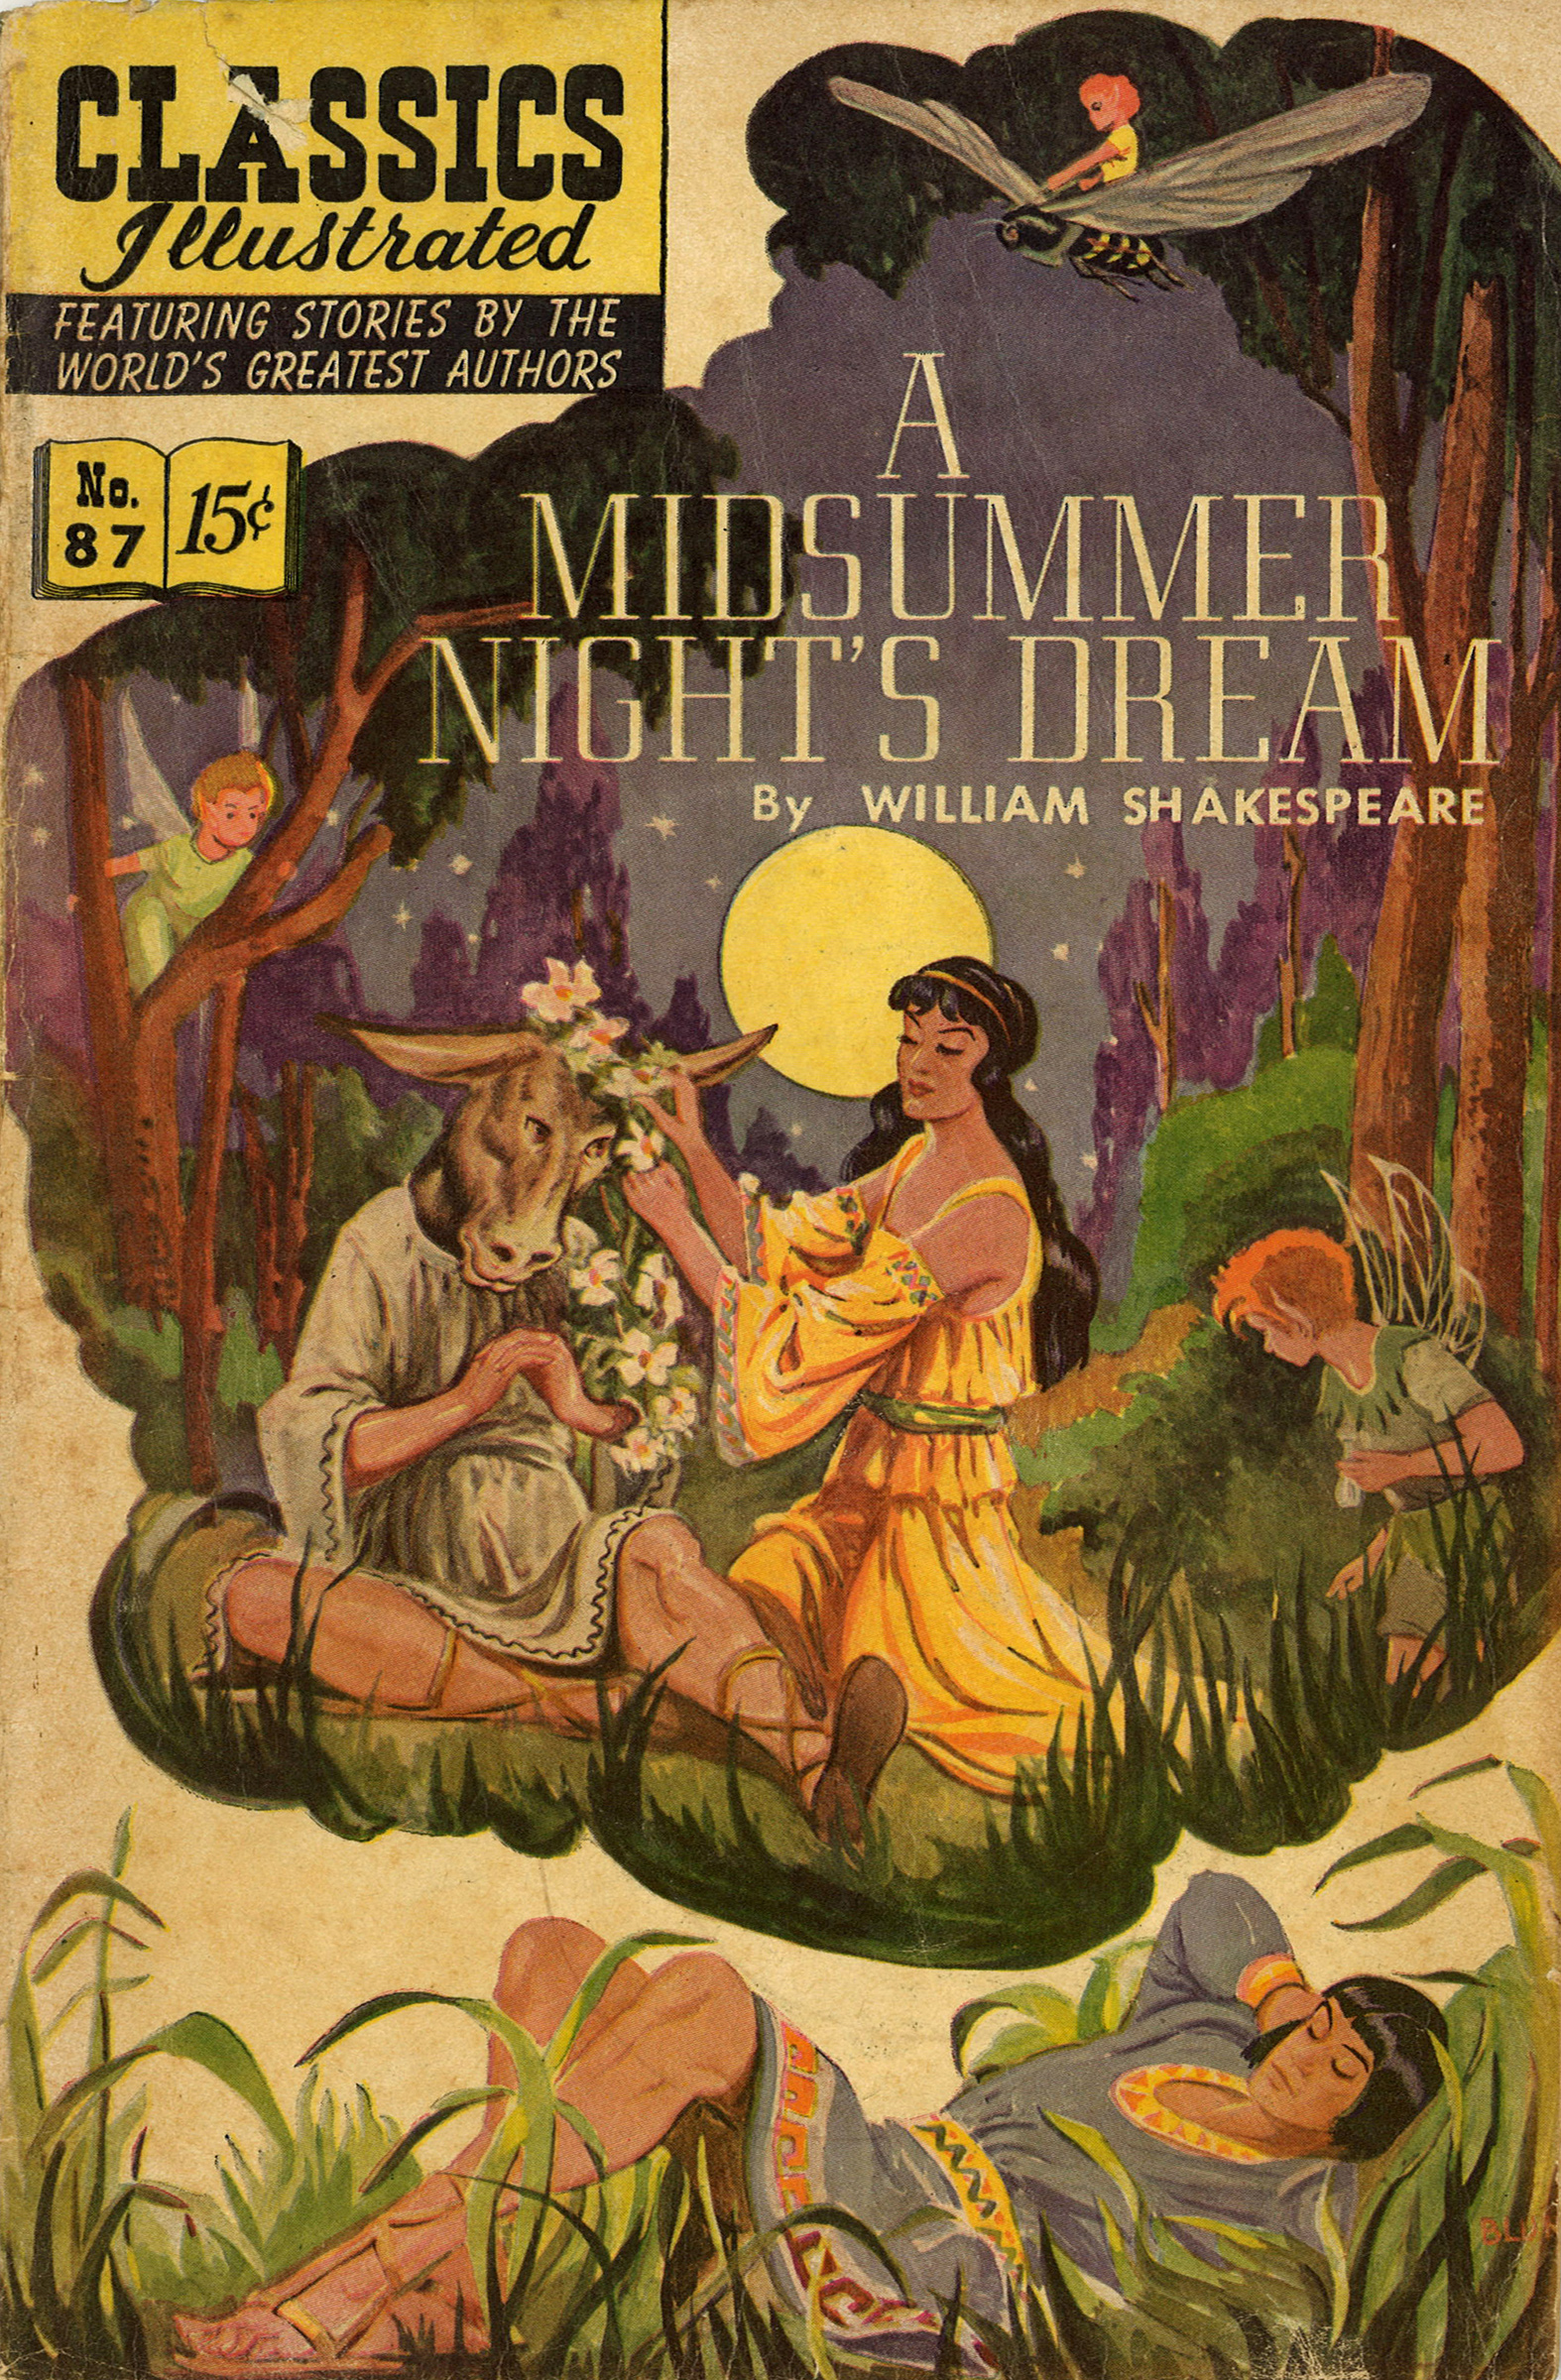 Cover of 1964 Classics Illustrated comic book version of Shakespeare's A Midsummer Night's Dream